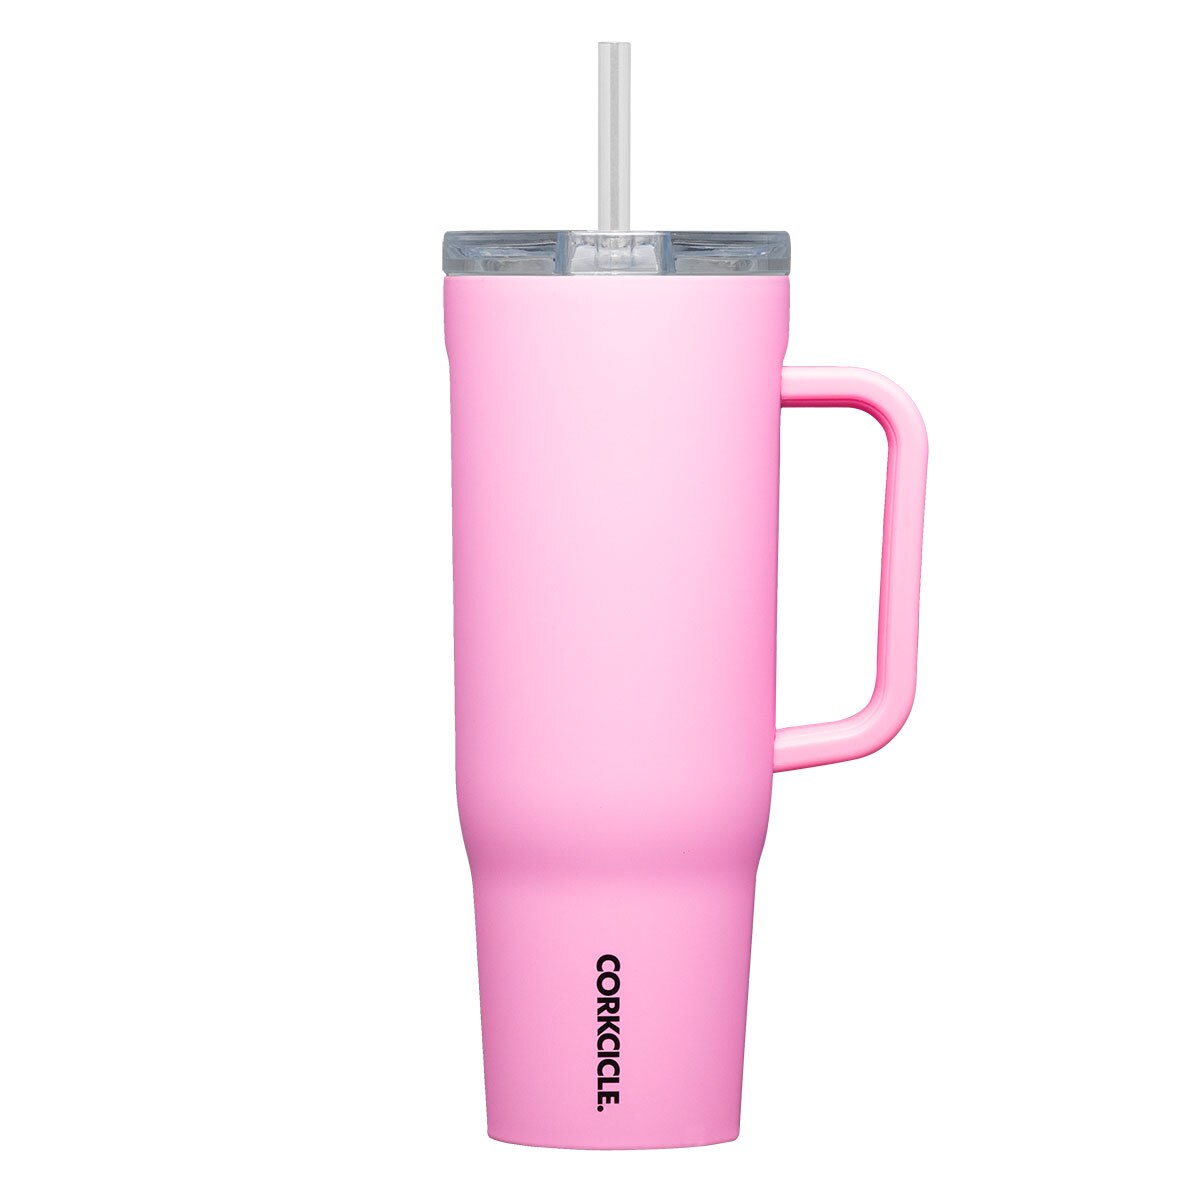 Corkcicle 40oz Cruiser Cup: MORE COLORS AVALIABLE